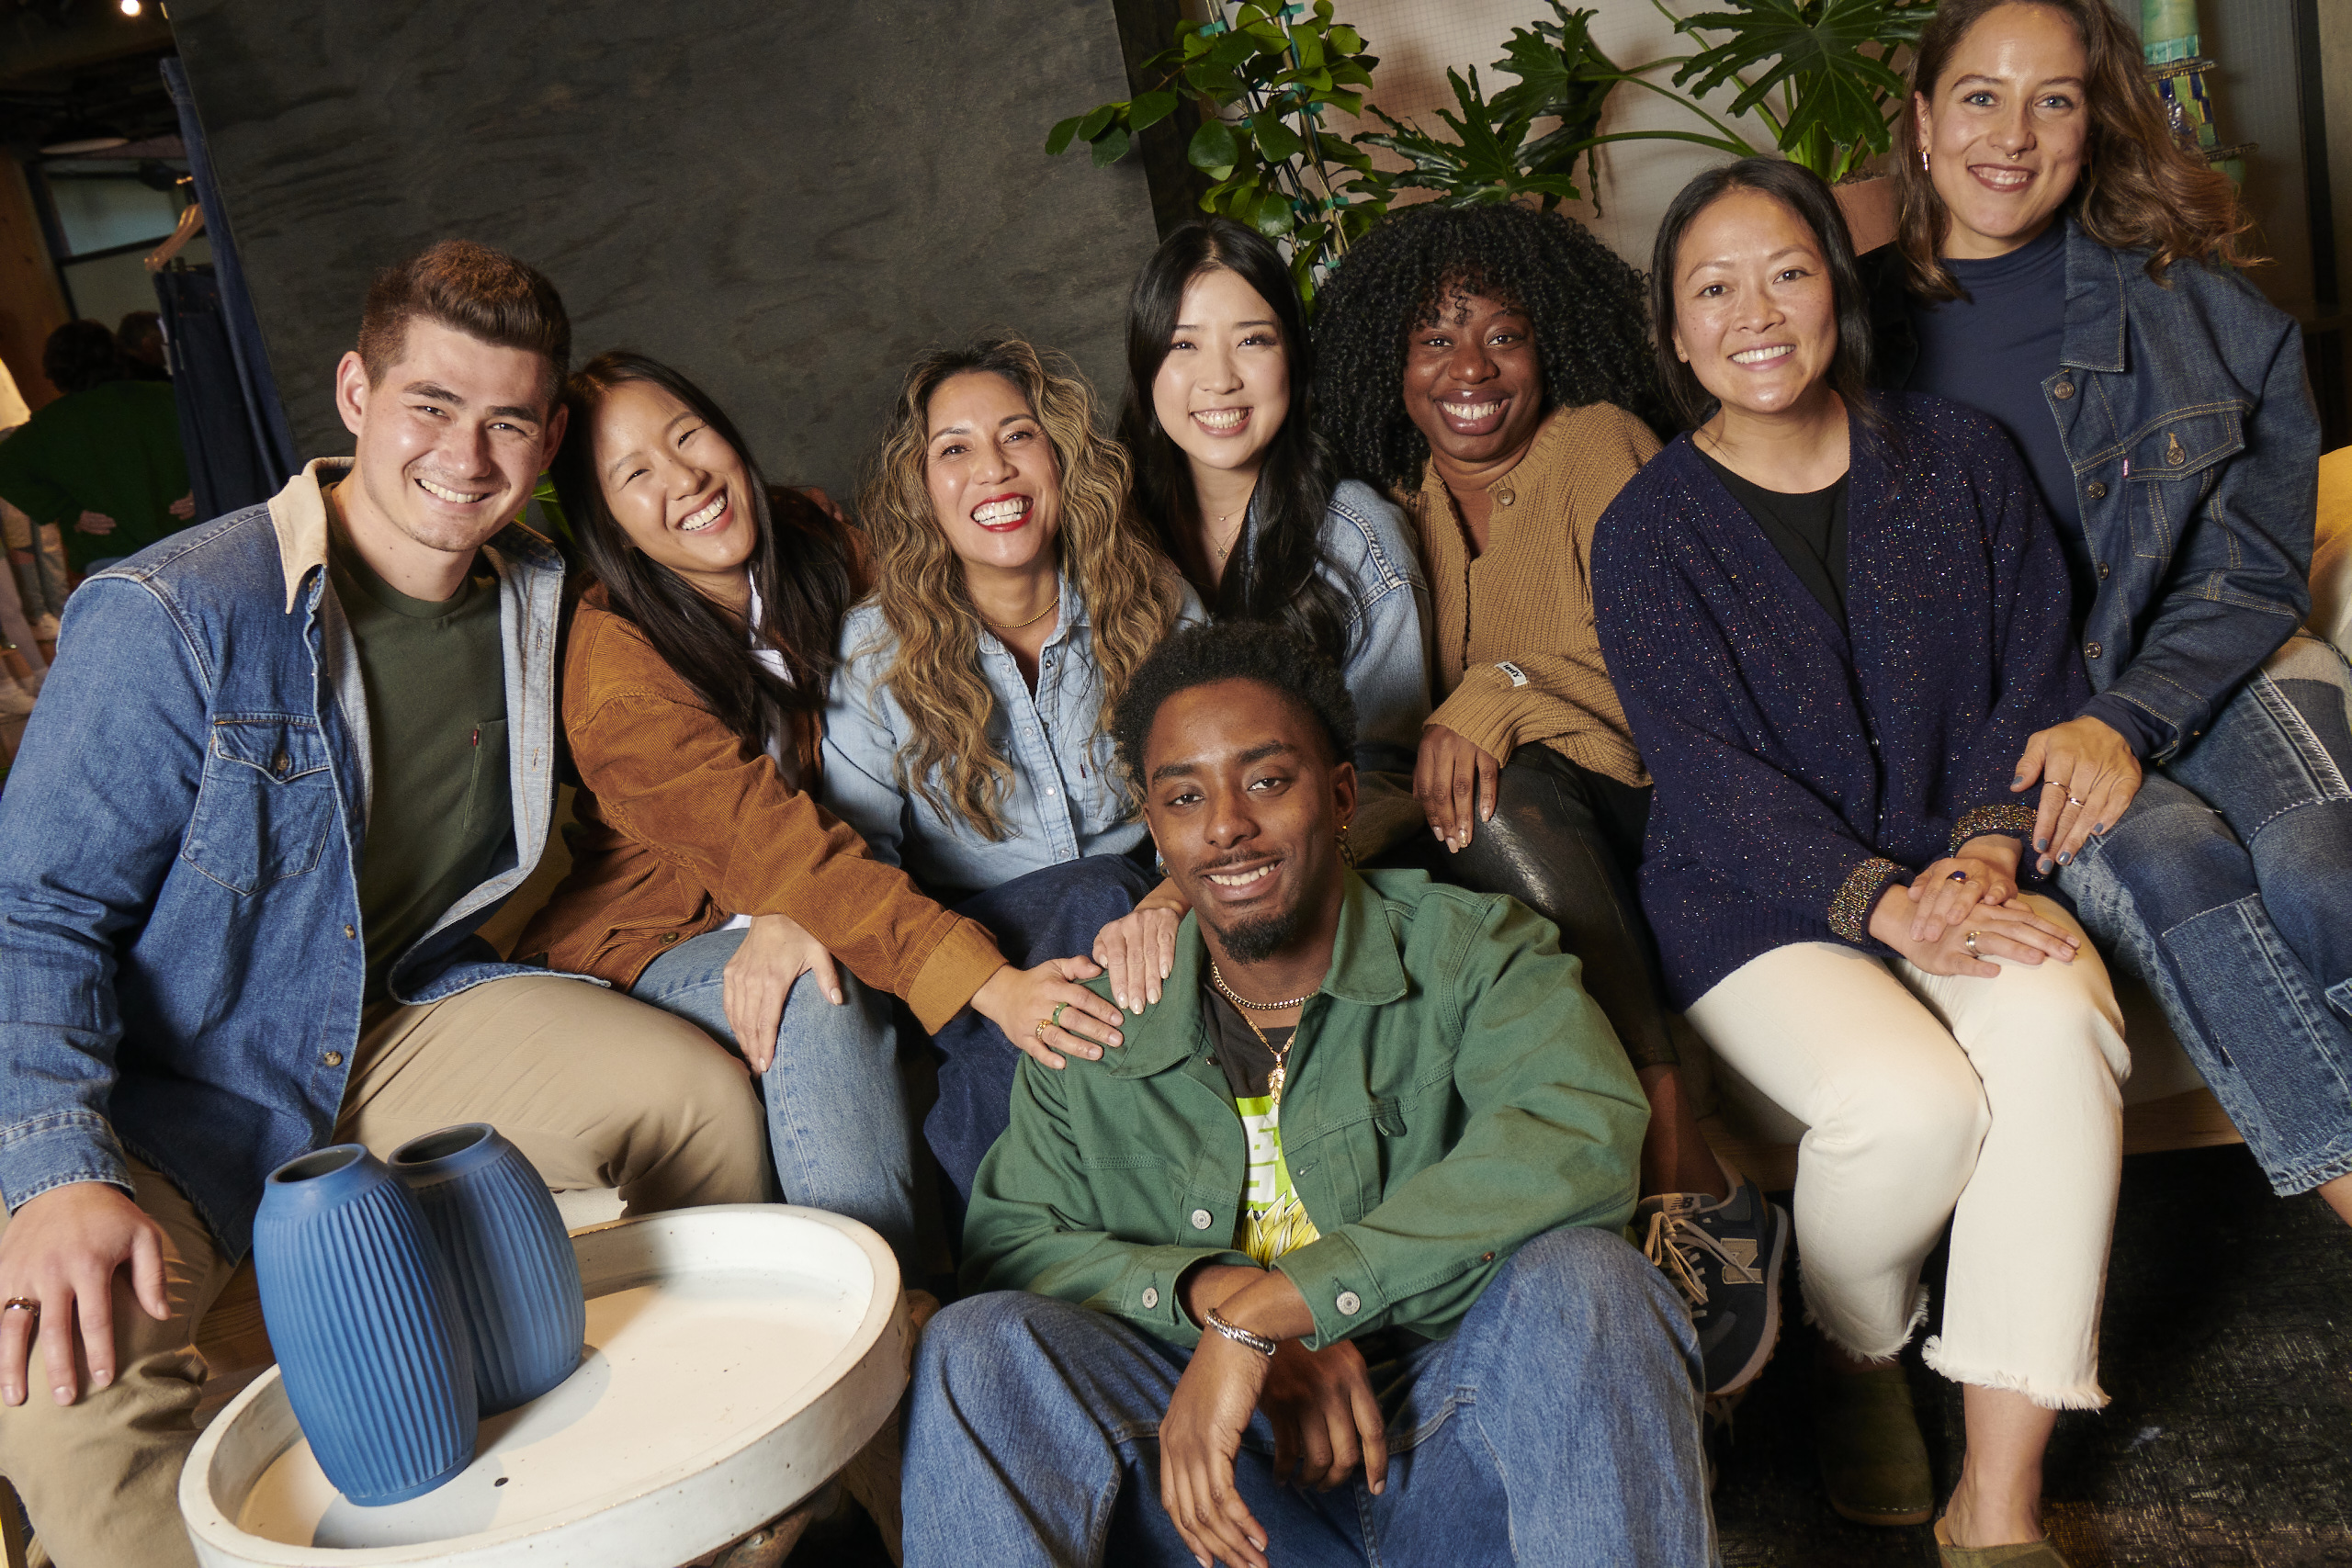 A group of LS&Co. employees sit on a couch and smile. Left to right: a young man with brown hair and a Levi's® sherpa trucker jacket; a young woman with long straight black hair in a tan jacket; a young woman in a chambray button-up with long wavy light brown hair; a young woman with long straight black hair in a denim jacket; a young woman with curly black hair in a tan button up sweater; a young woman with black hair tied back in a sparkly navy sweater and white pants; a young woman with short brown hair in a navy shirt with a denim jacket. A young man with short black hair and a green jacket and blue jeans sits in front of the group.